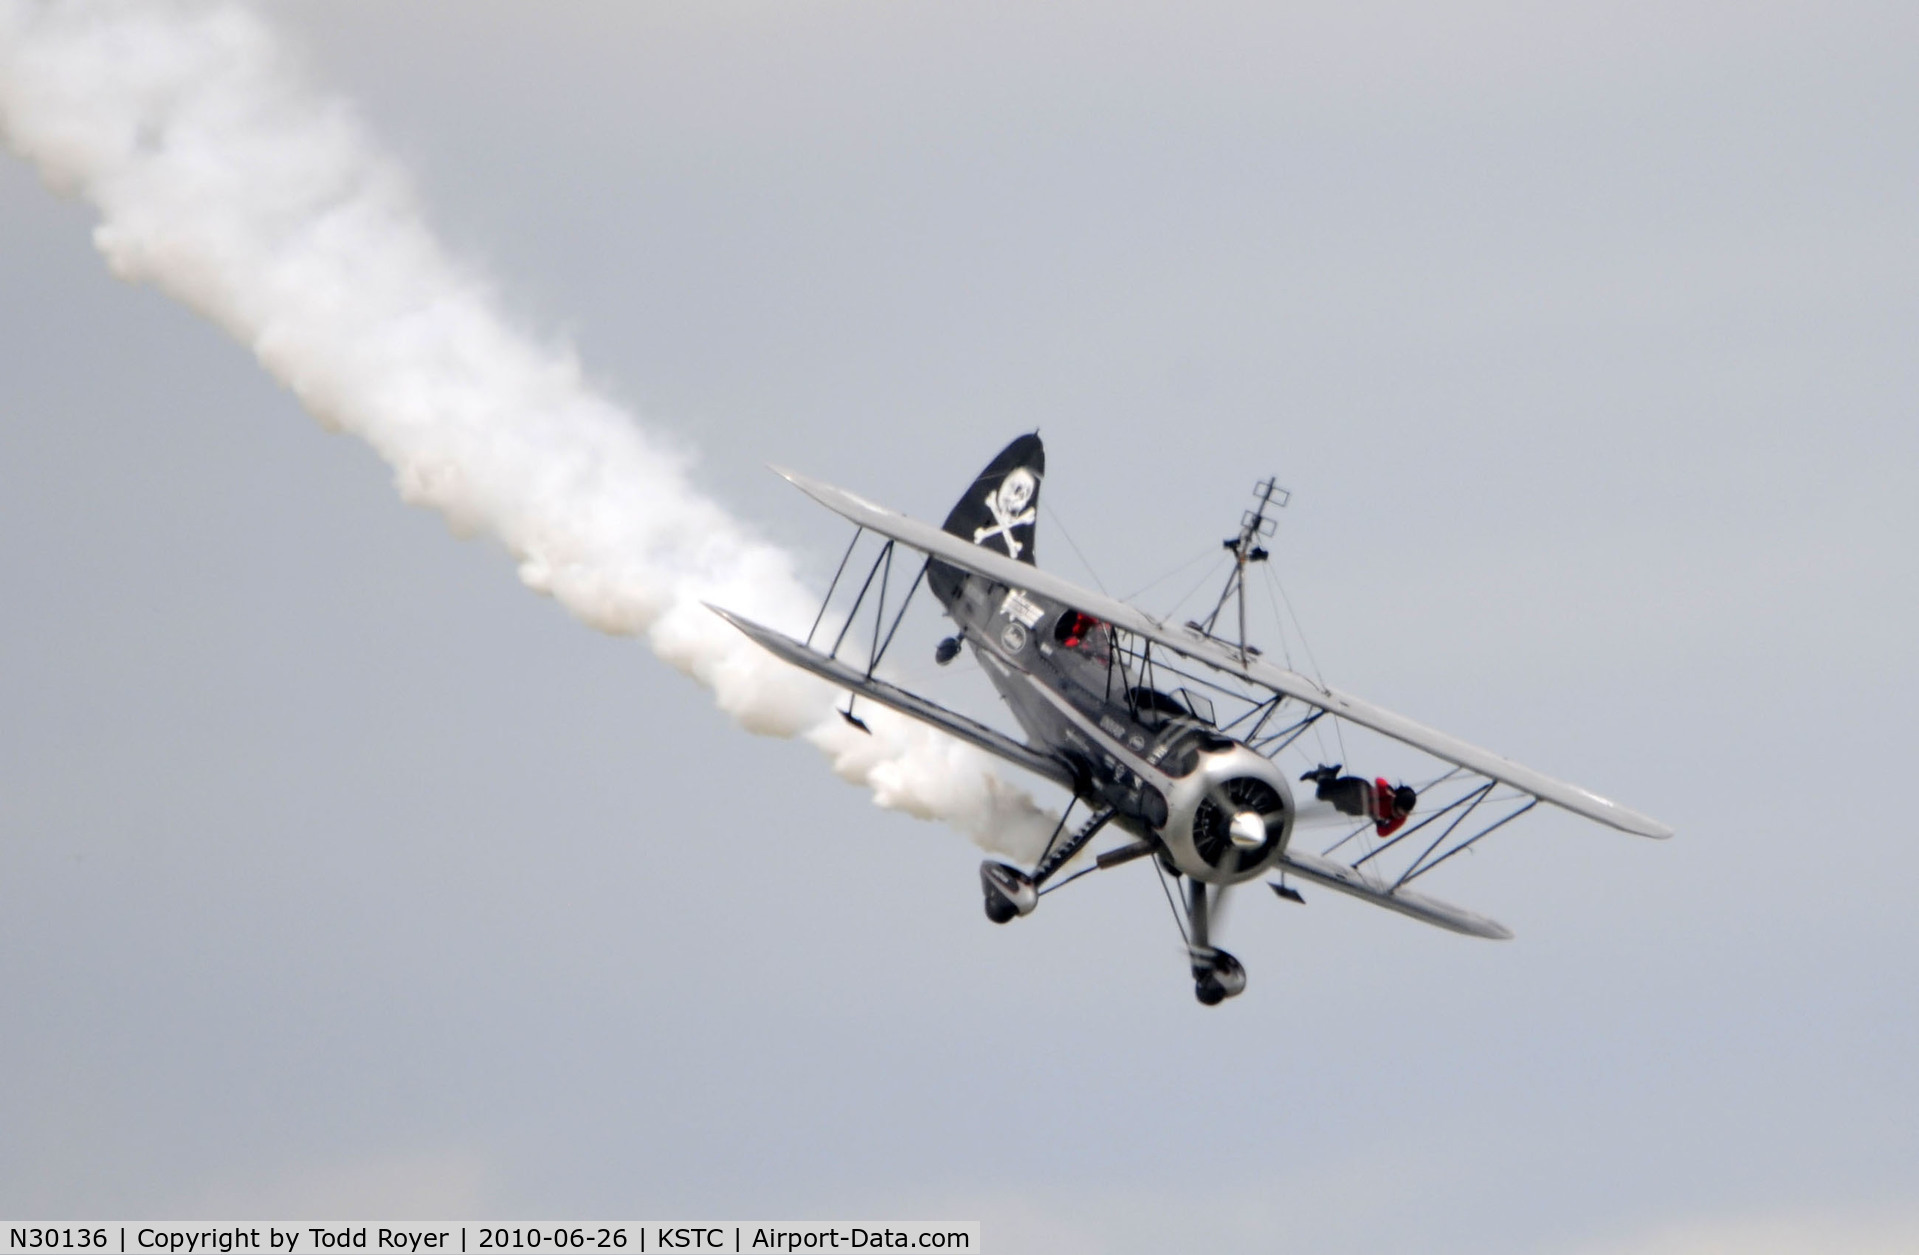 N30136, 1980 Waco UPF-7 C/N 5533, performing at the 2010 Great Minnesota Air show